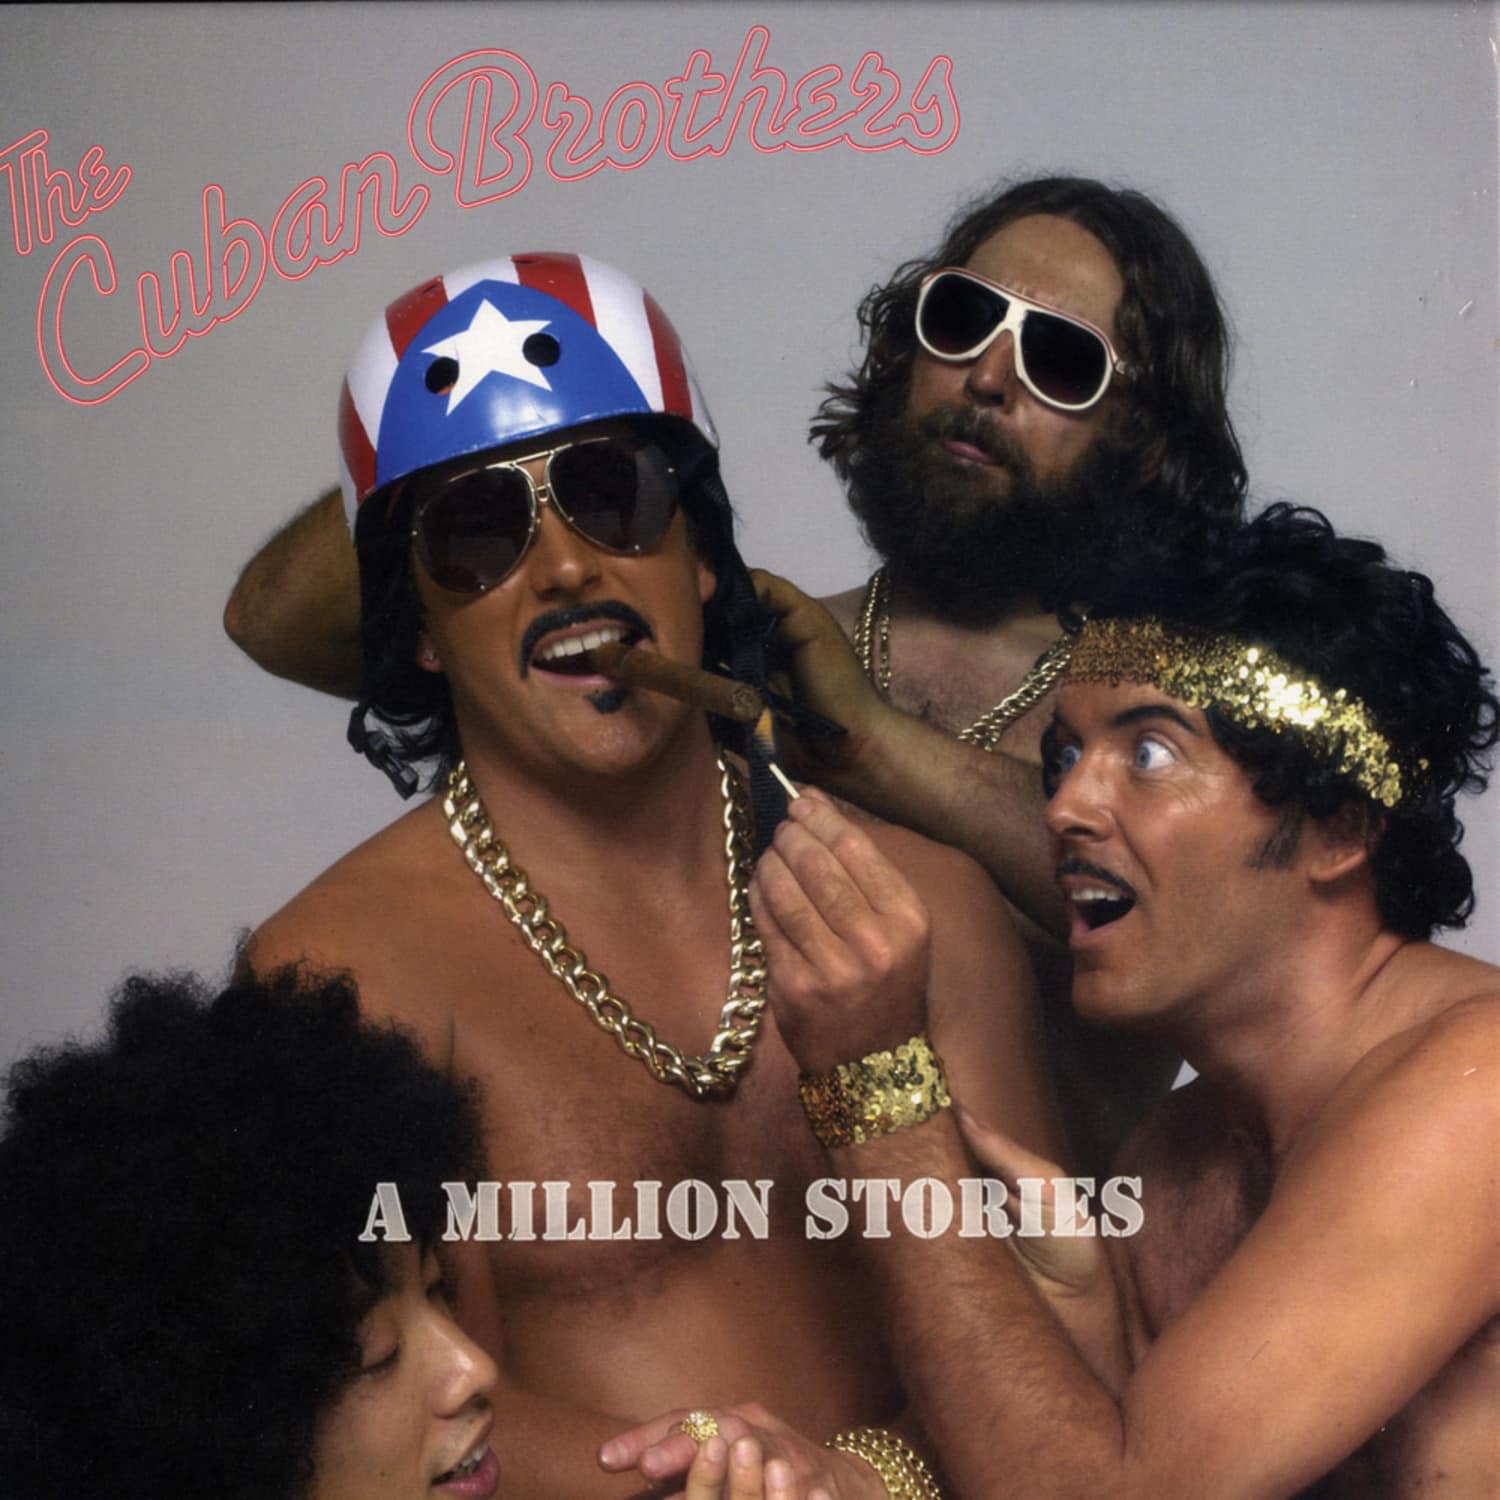 The Cuban Brothers - A MILLION STORIES